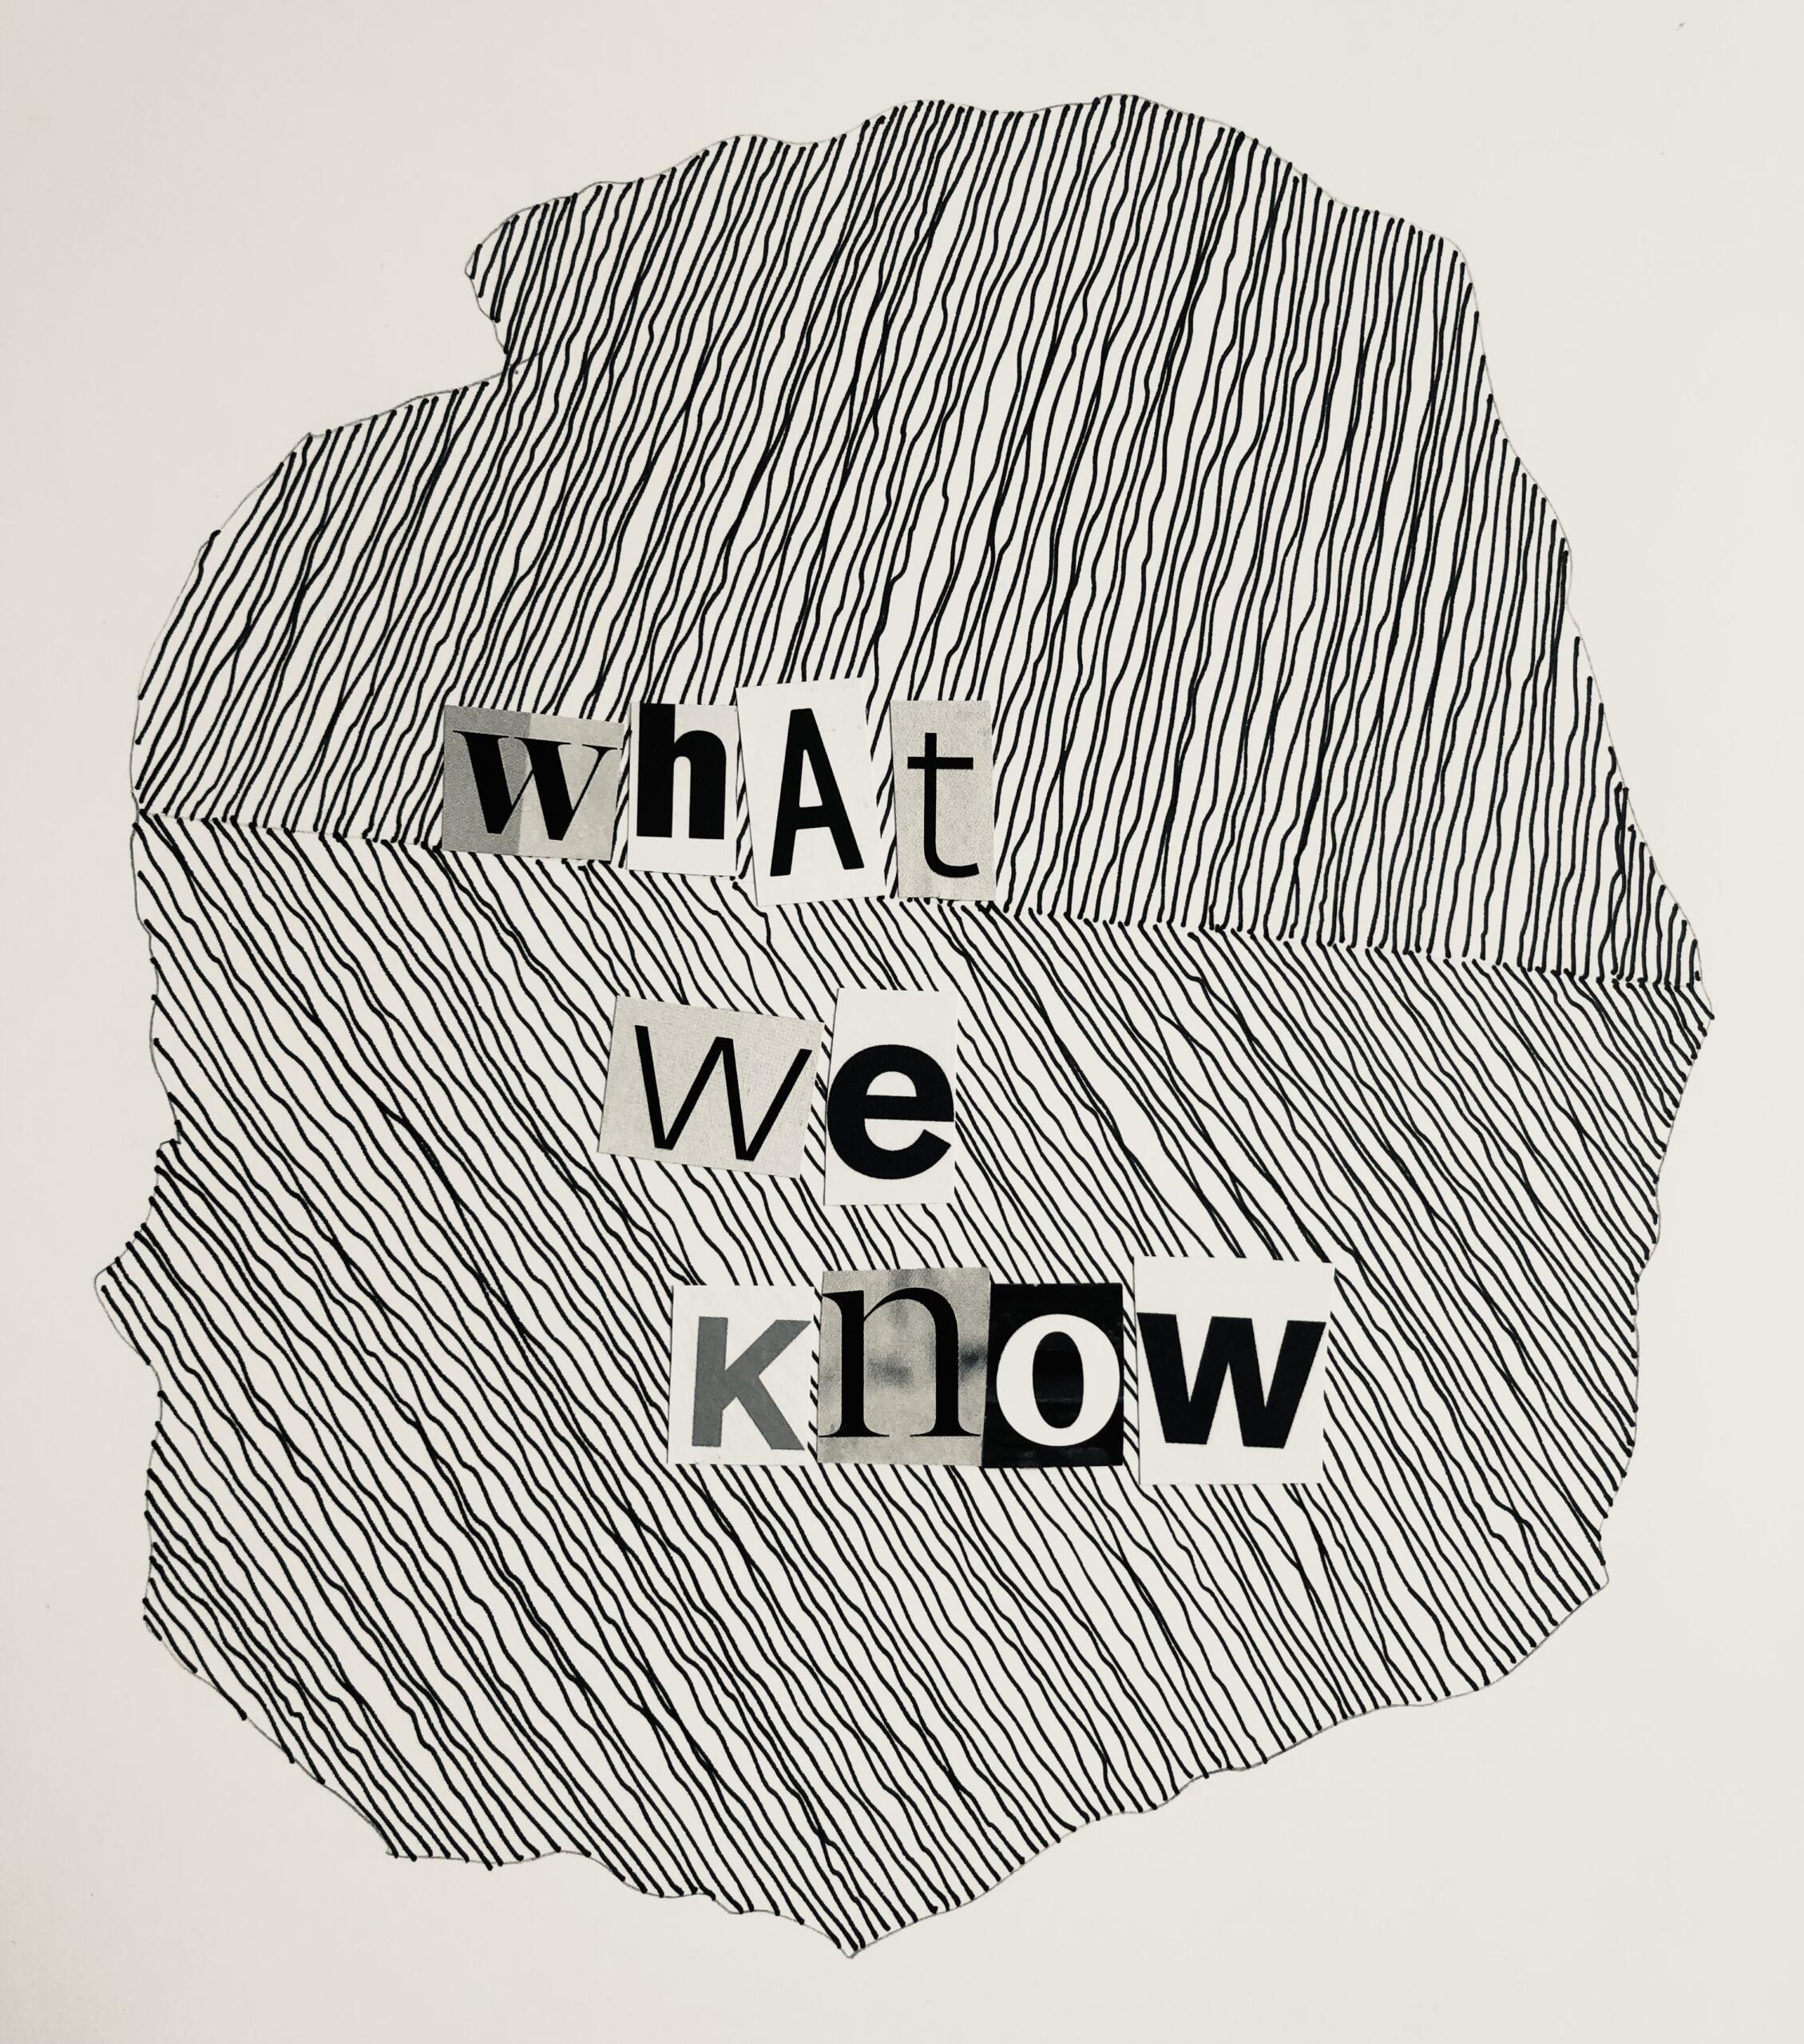 An abstract drawing of circles and lines, with letters cut in various styles collaged over that reads "what we know"